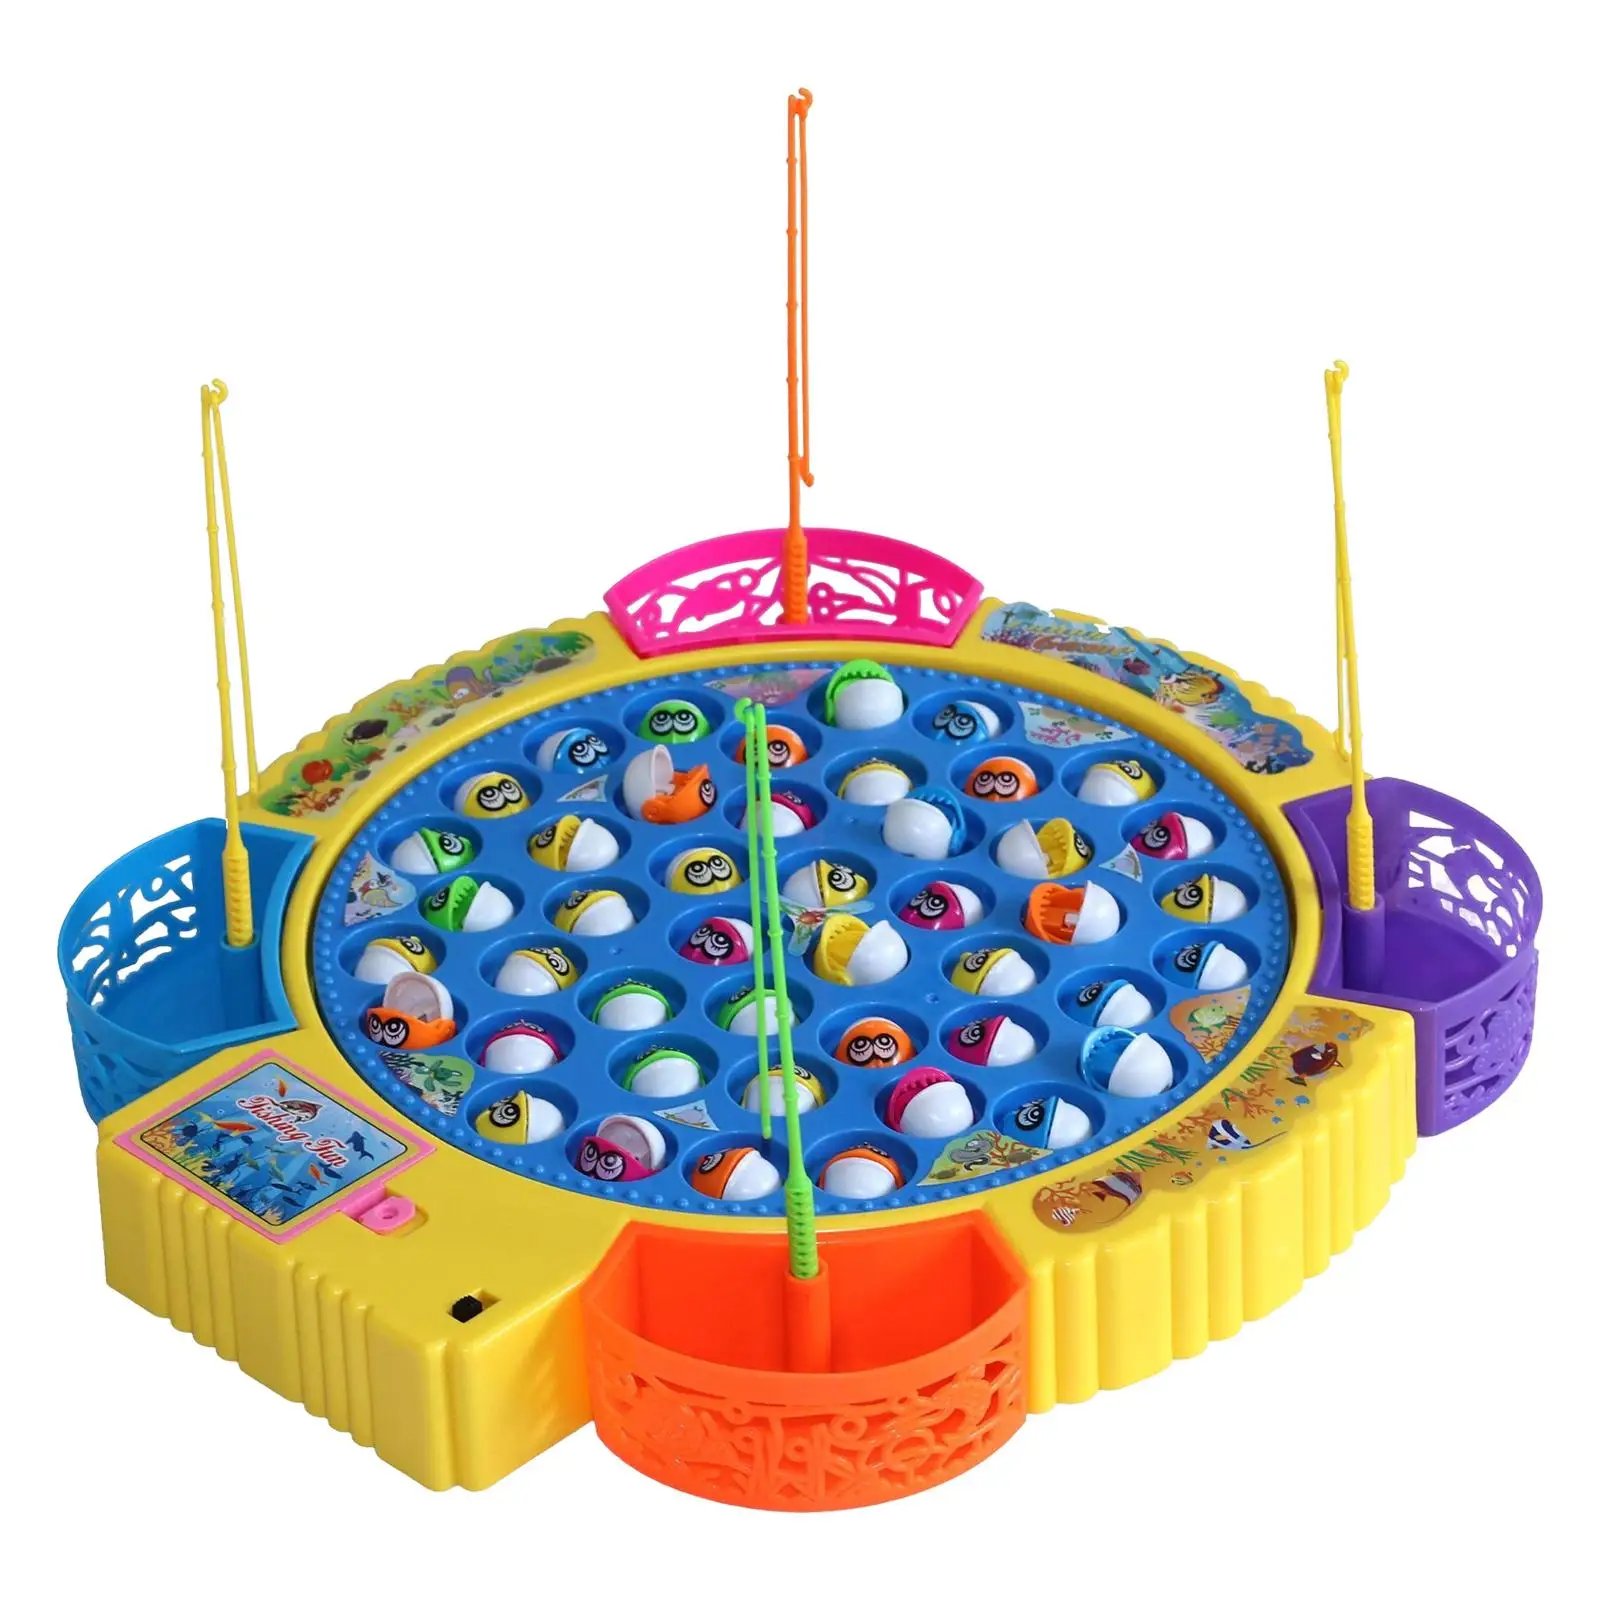 Novelty Rotating Fishing Game Kids toy, kids Fishing Toy for 3-5 Years Old Kids Children Educational Toy Early Learning Toy